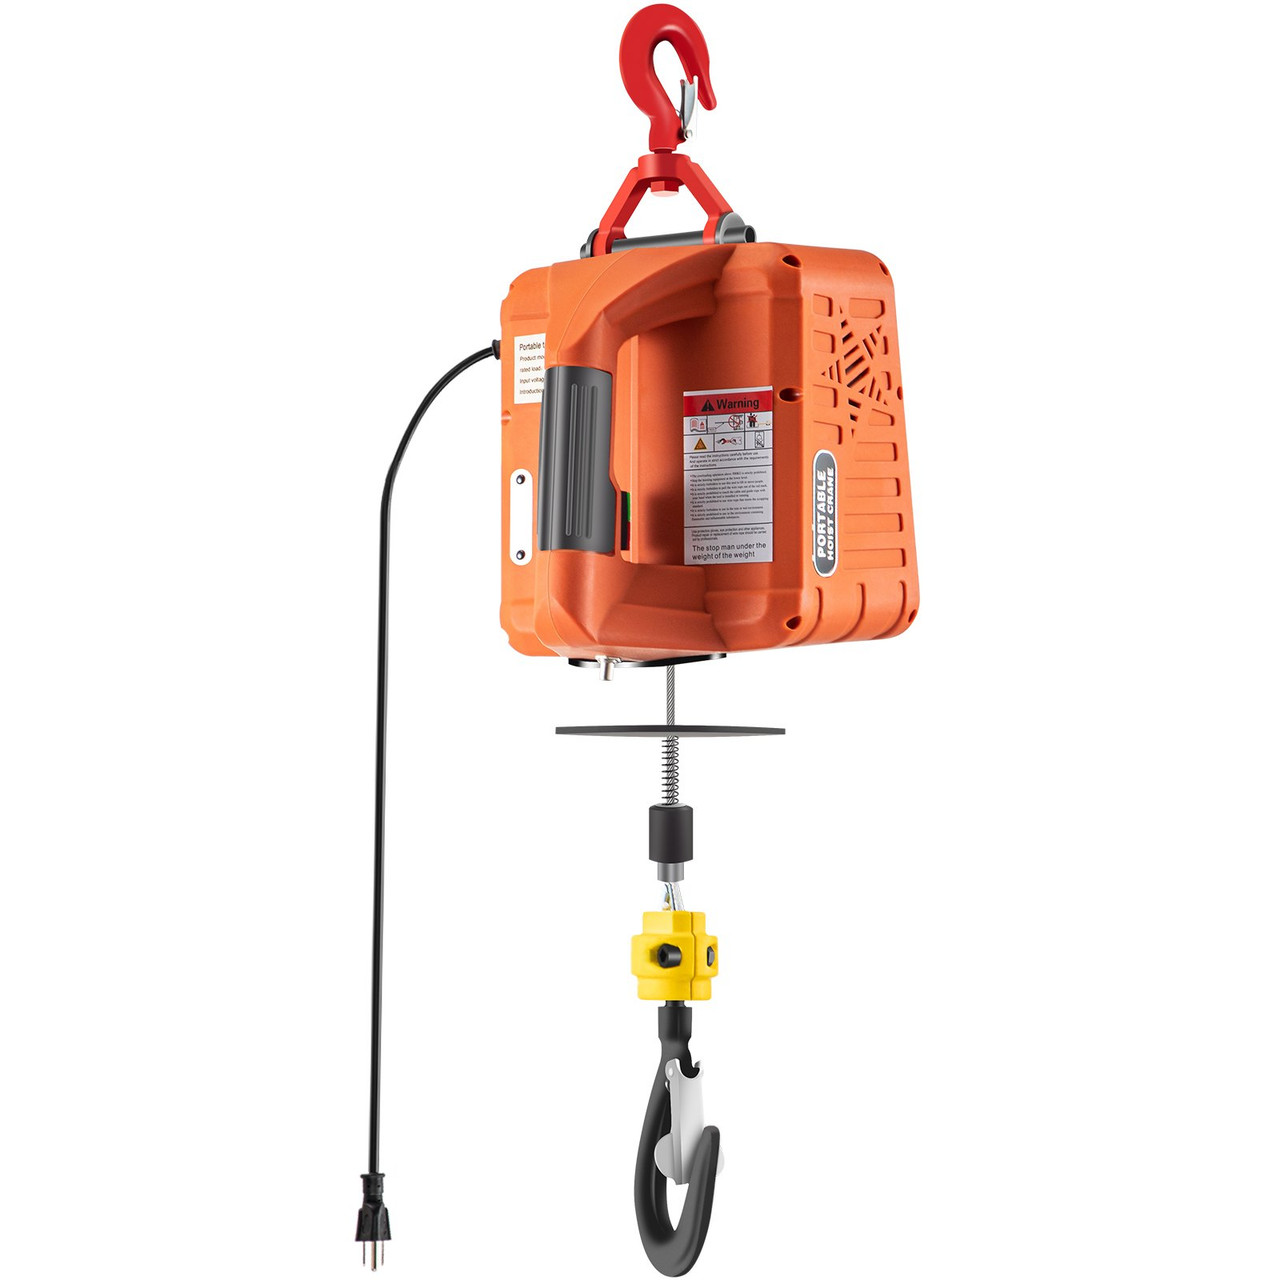 Electric Hoist Winch, 1100lbs Portable Electric Winch, 1500W 110V Power Winch Crane, 25ft Lifting Height, w/Wireless Remote Control and Overload Protection for Garages Warehouse Lifting Towing